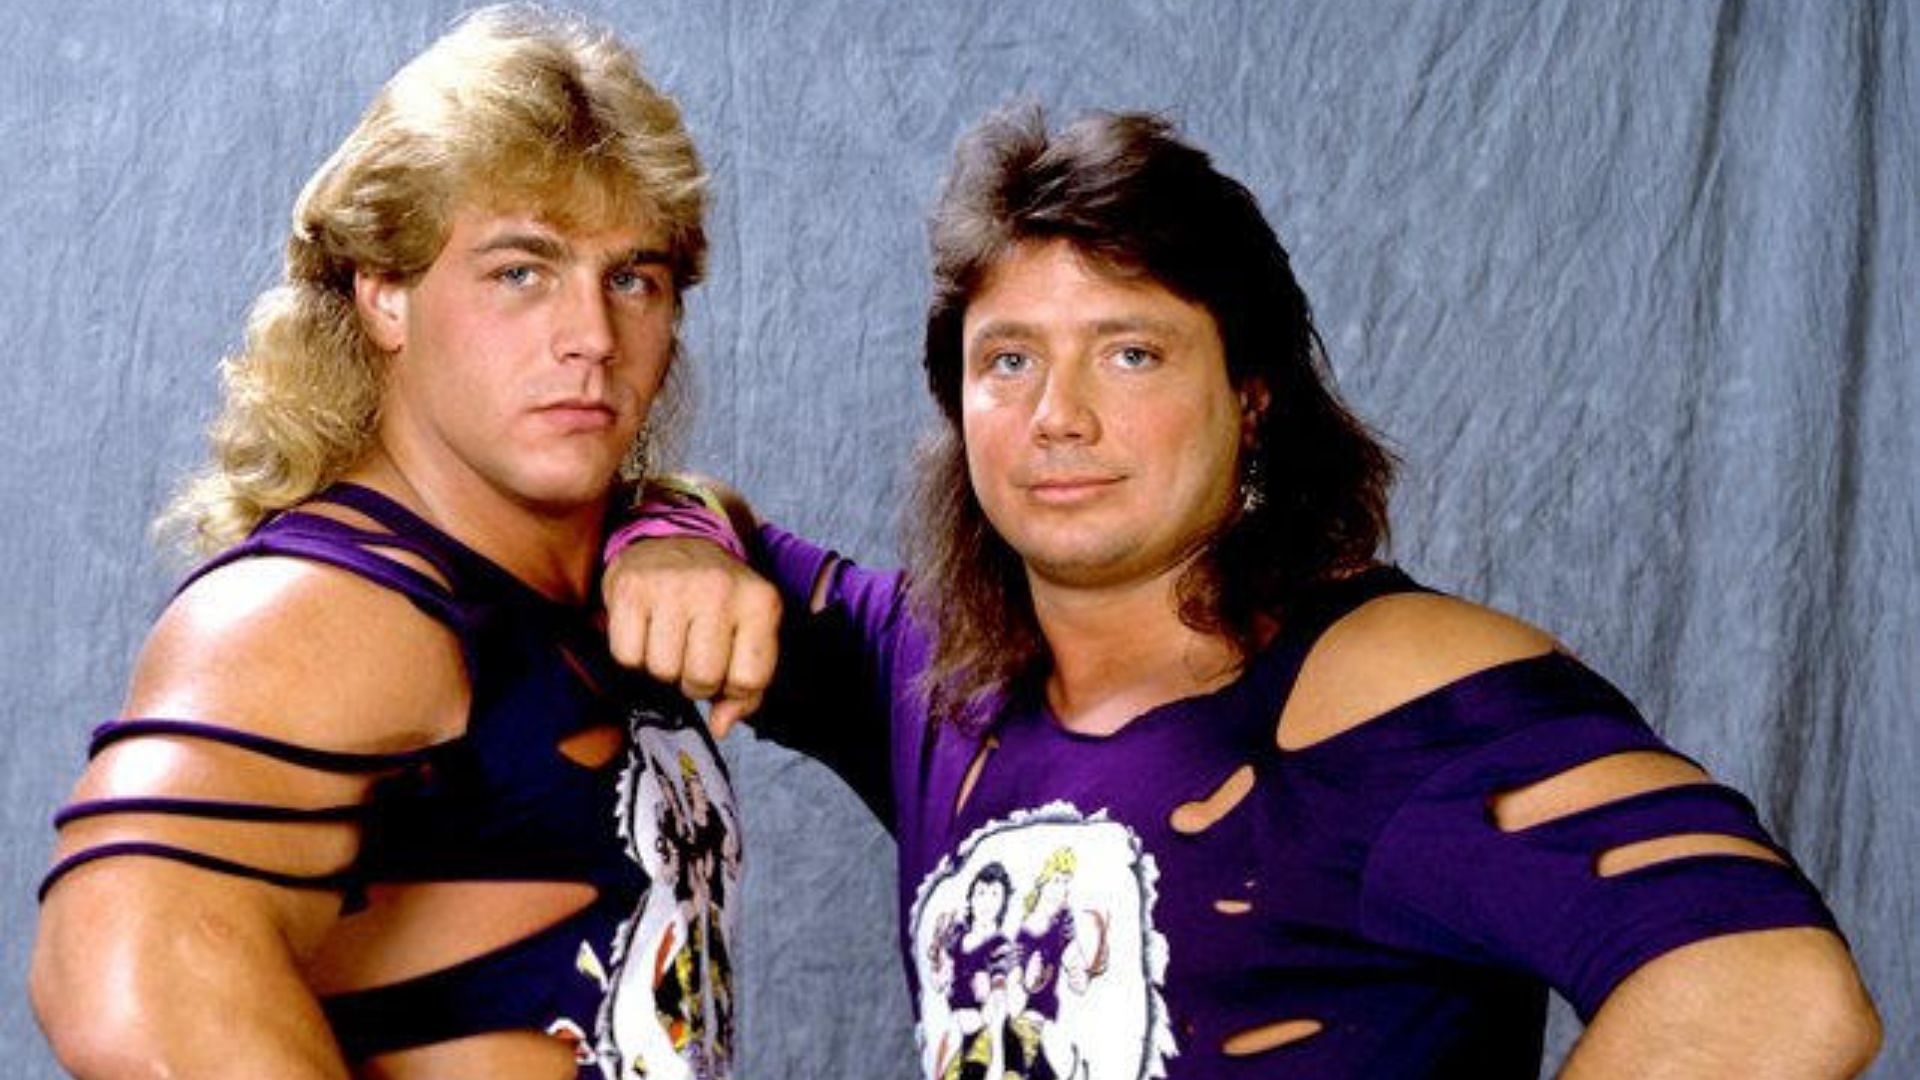 Shawn Michaels (left); Marty Jannetty (right)